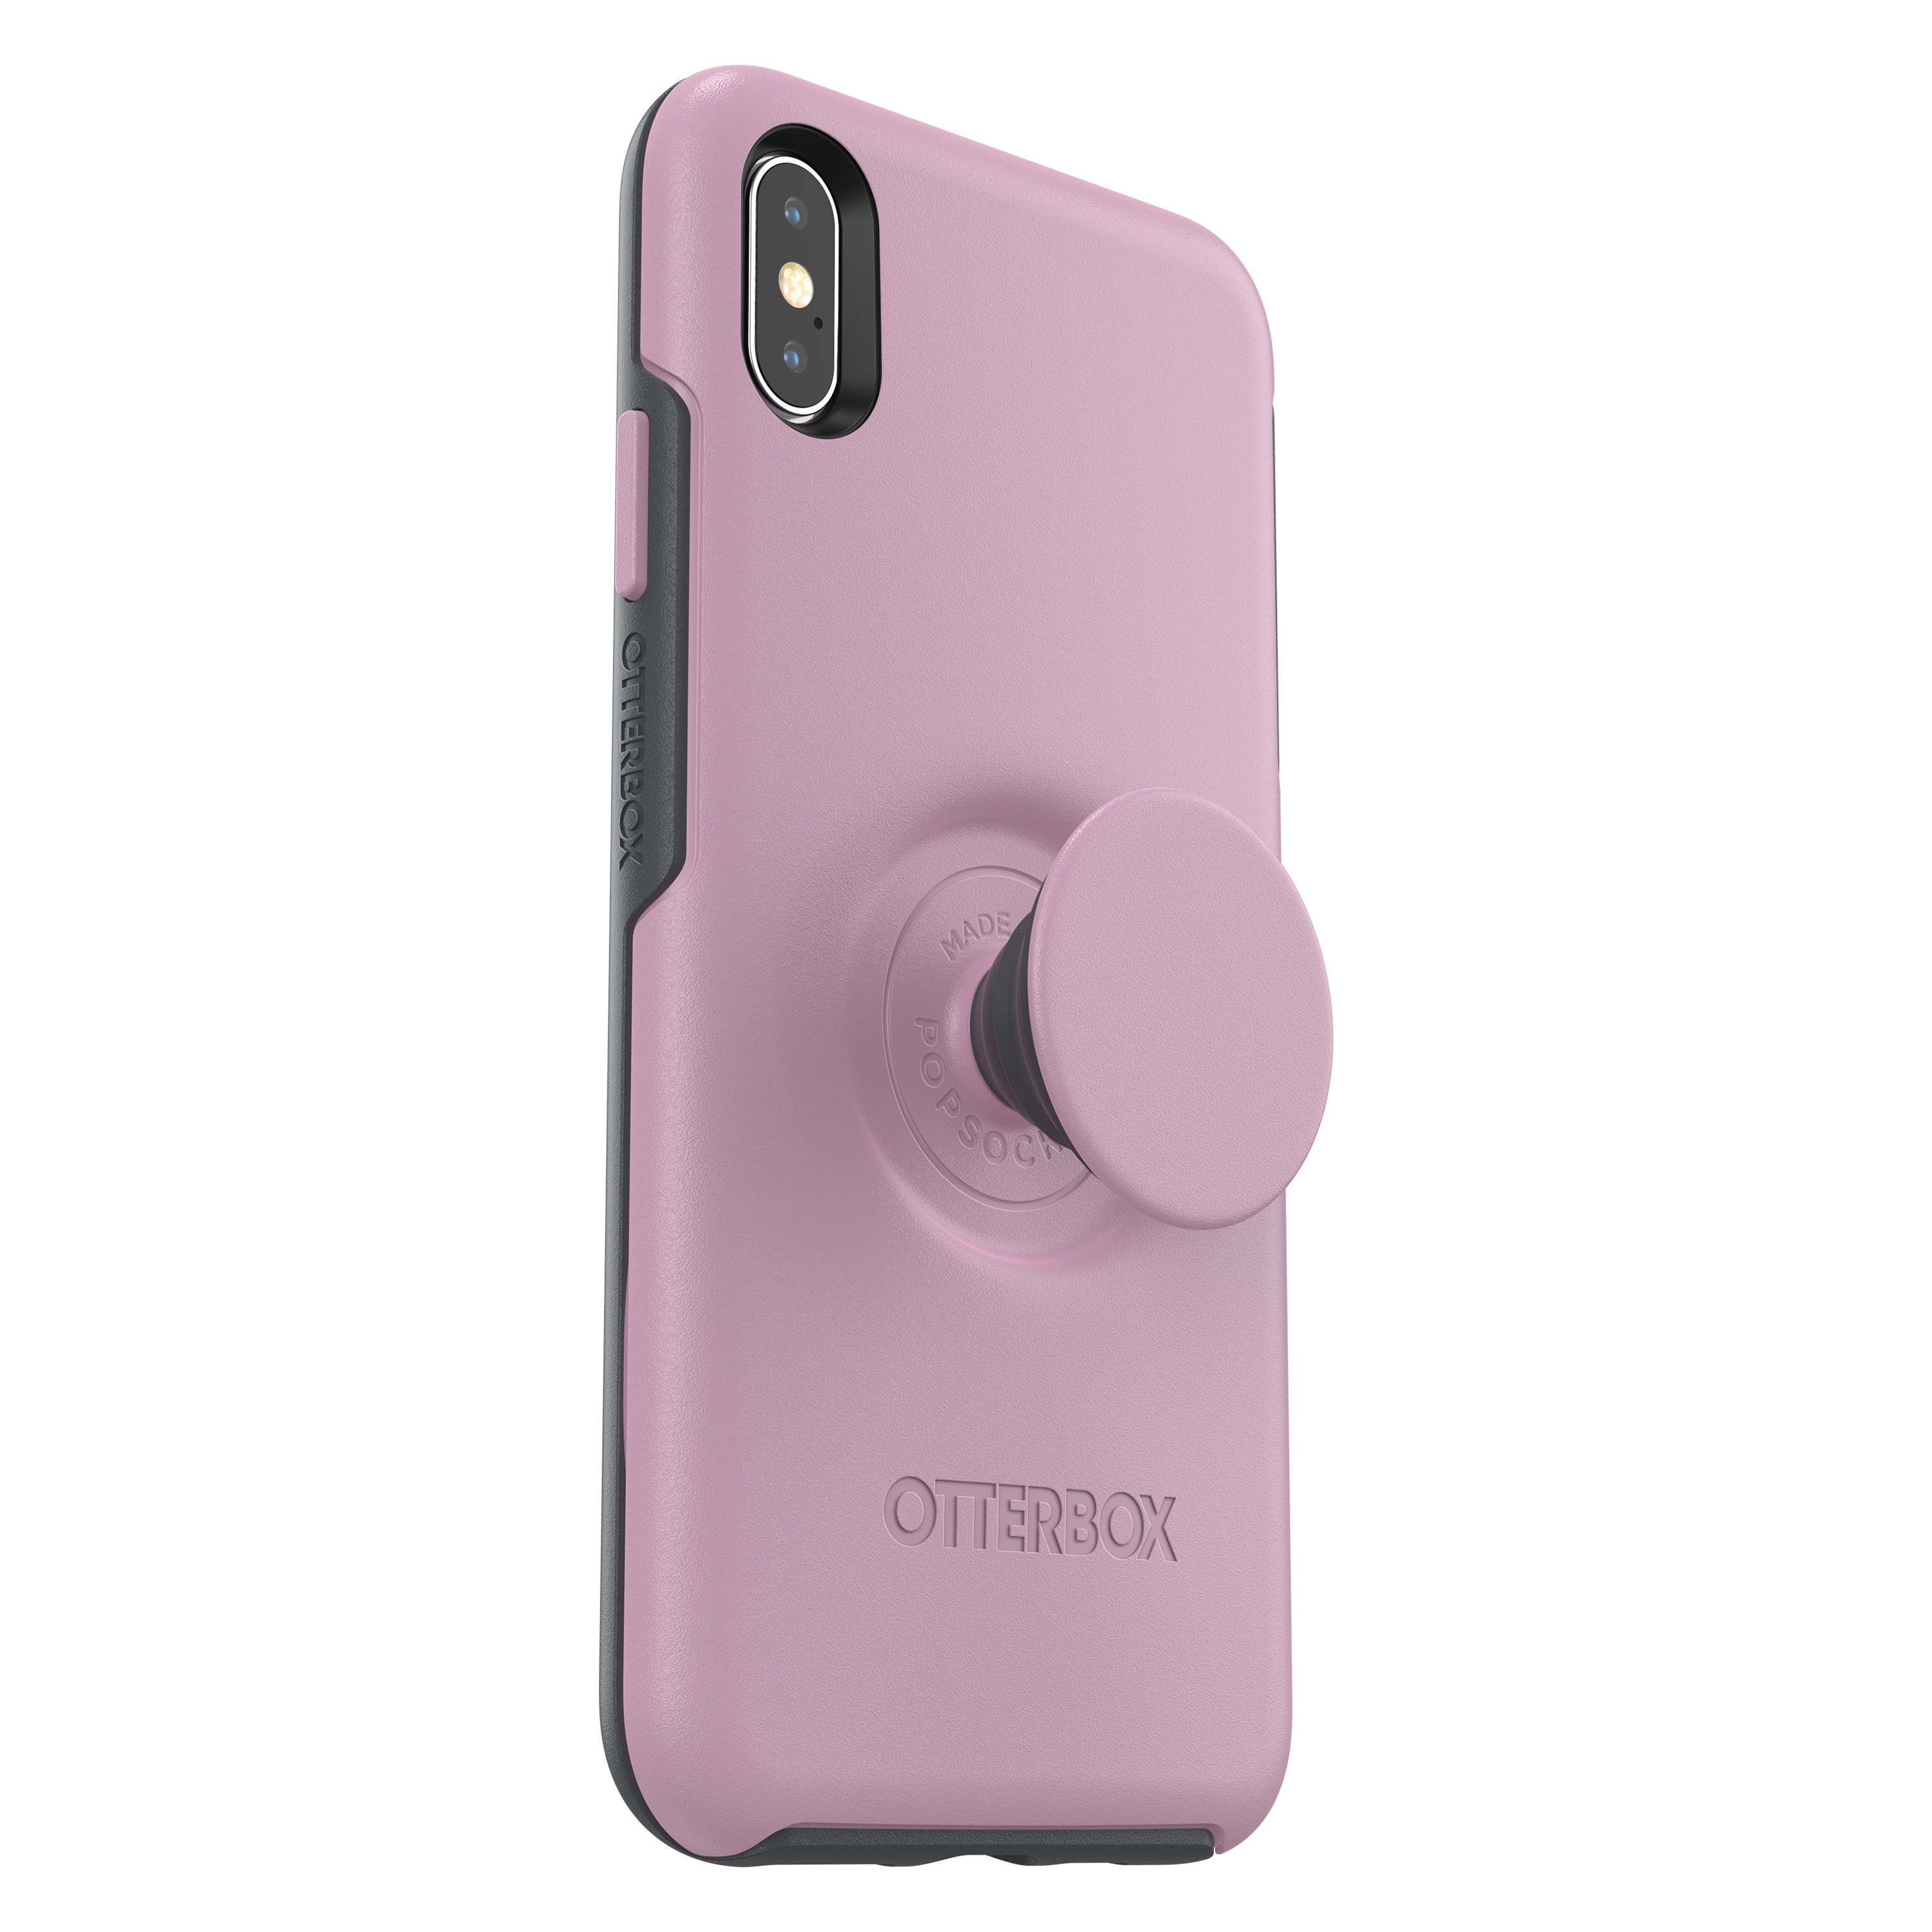 XS Apple, iPhone OTTERBOX Backcover, Pink Max, + Pop Otter Symmetry,